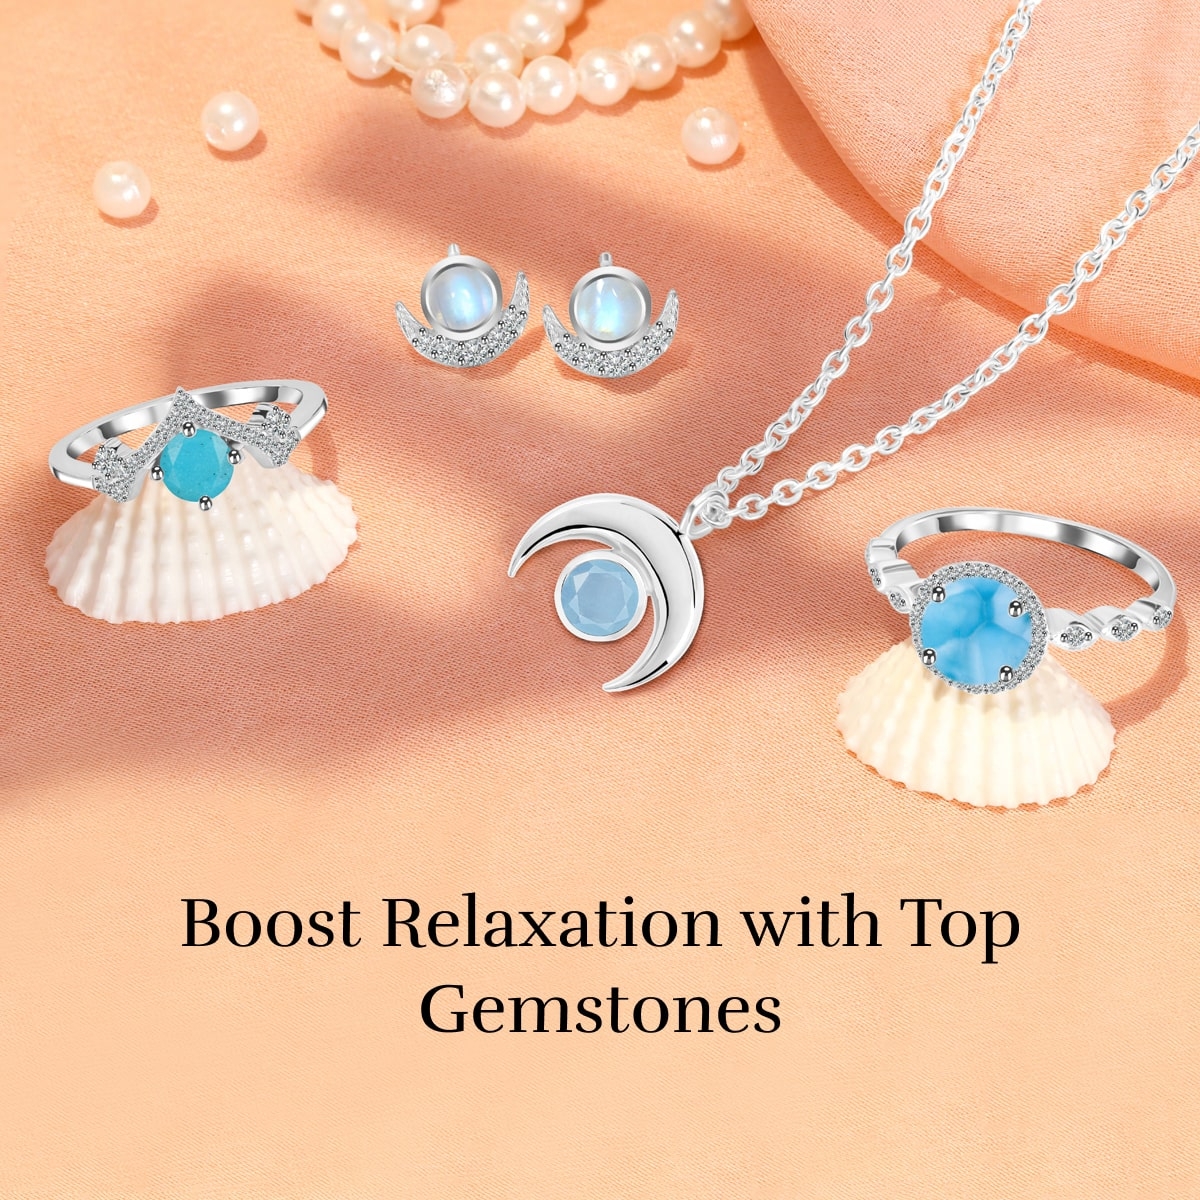 Top Gemstones that Boost Relaxation